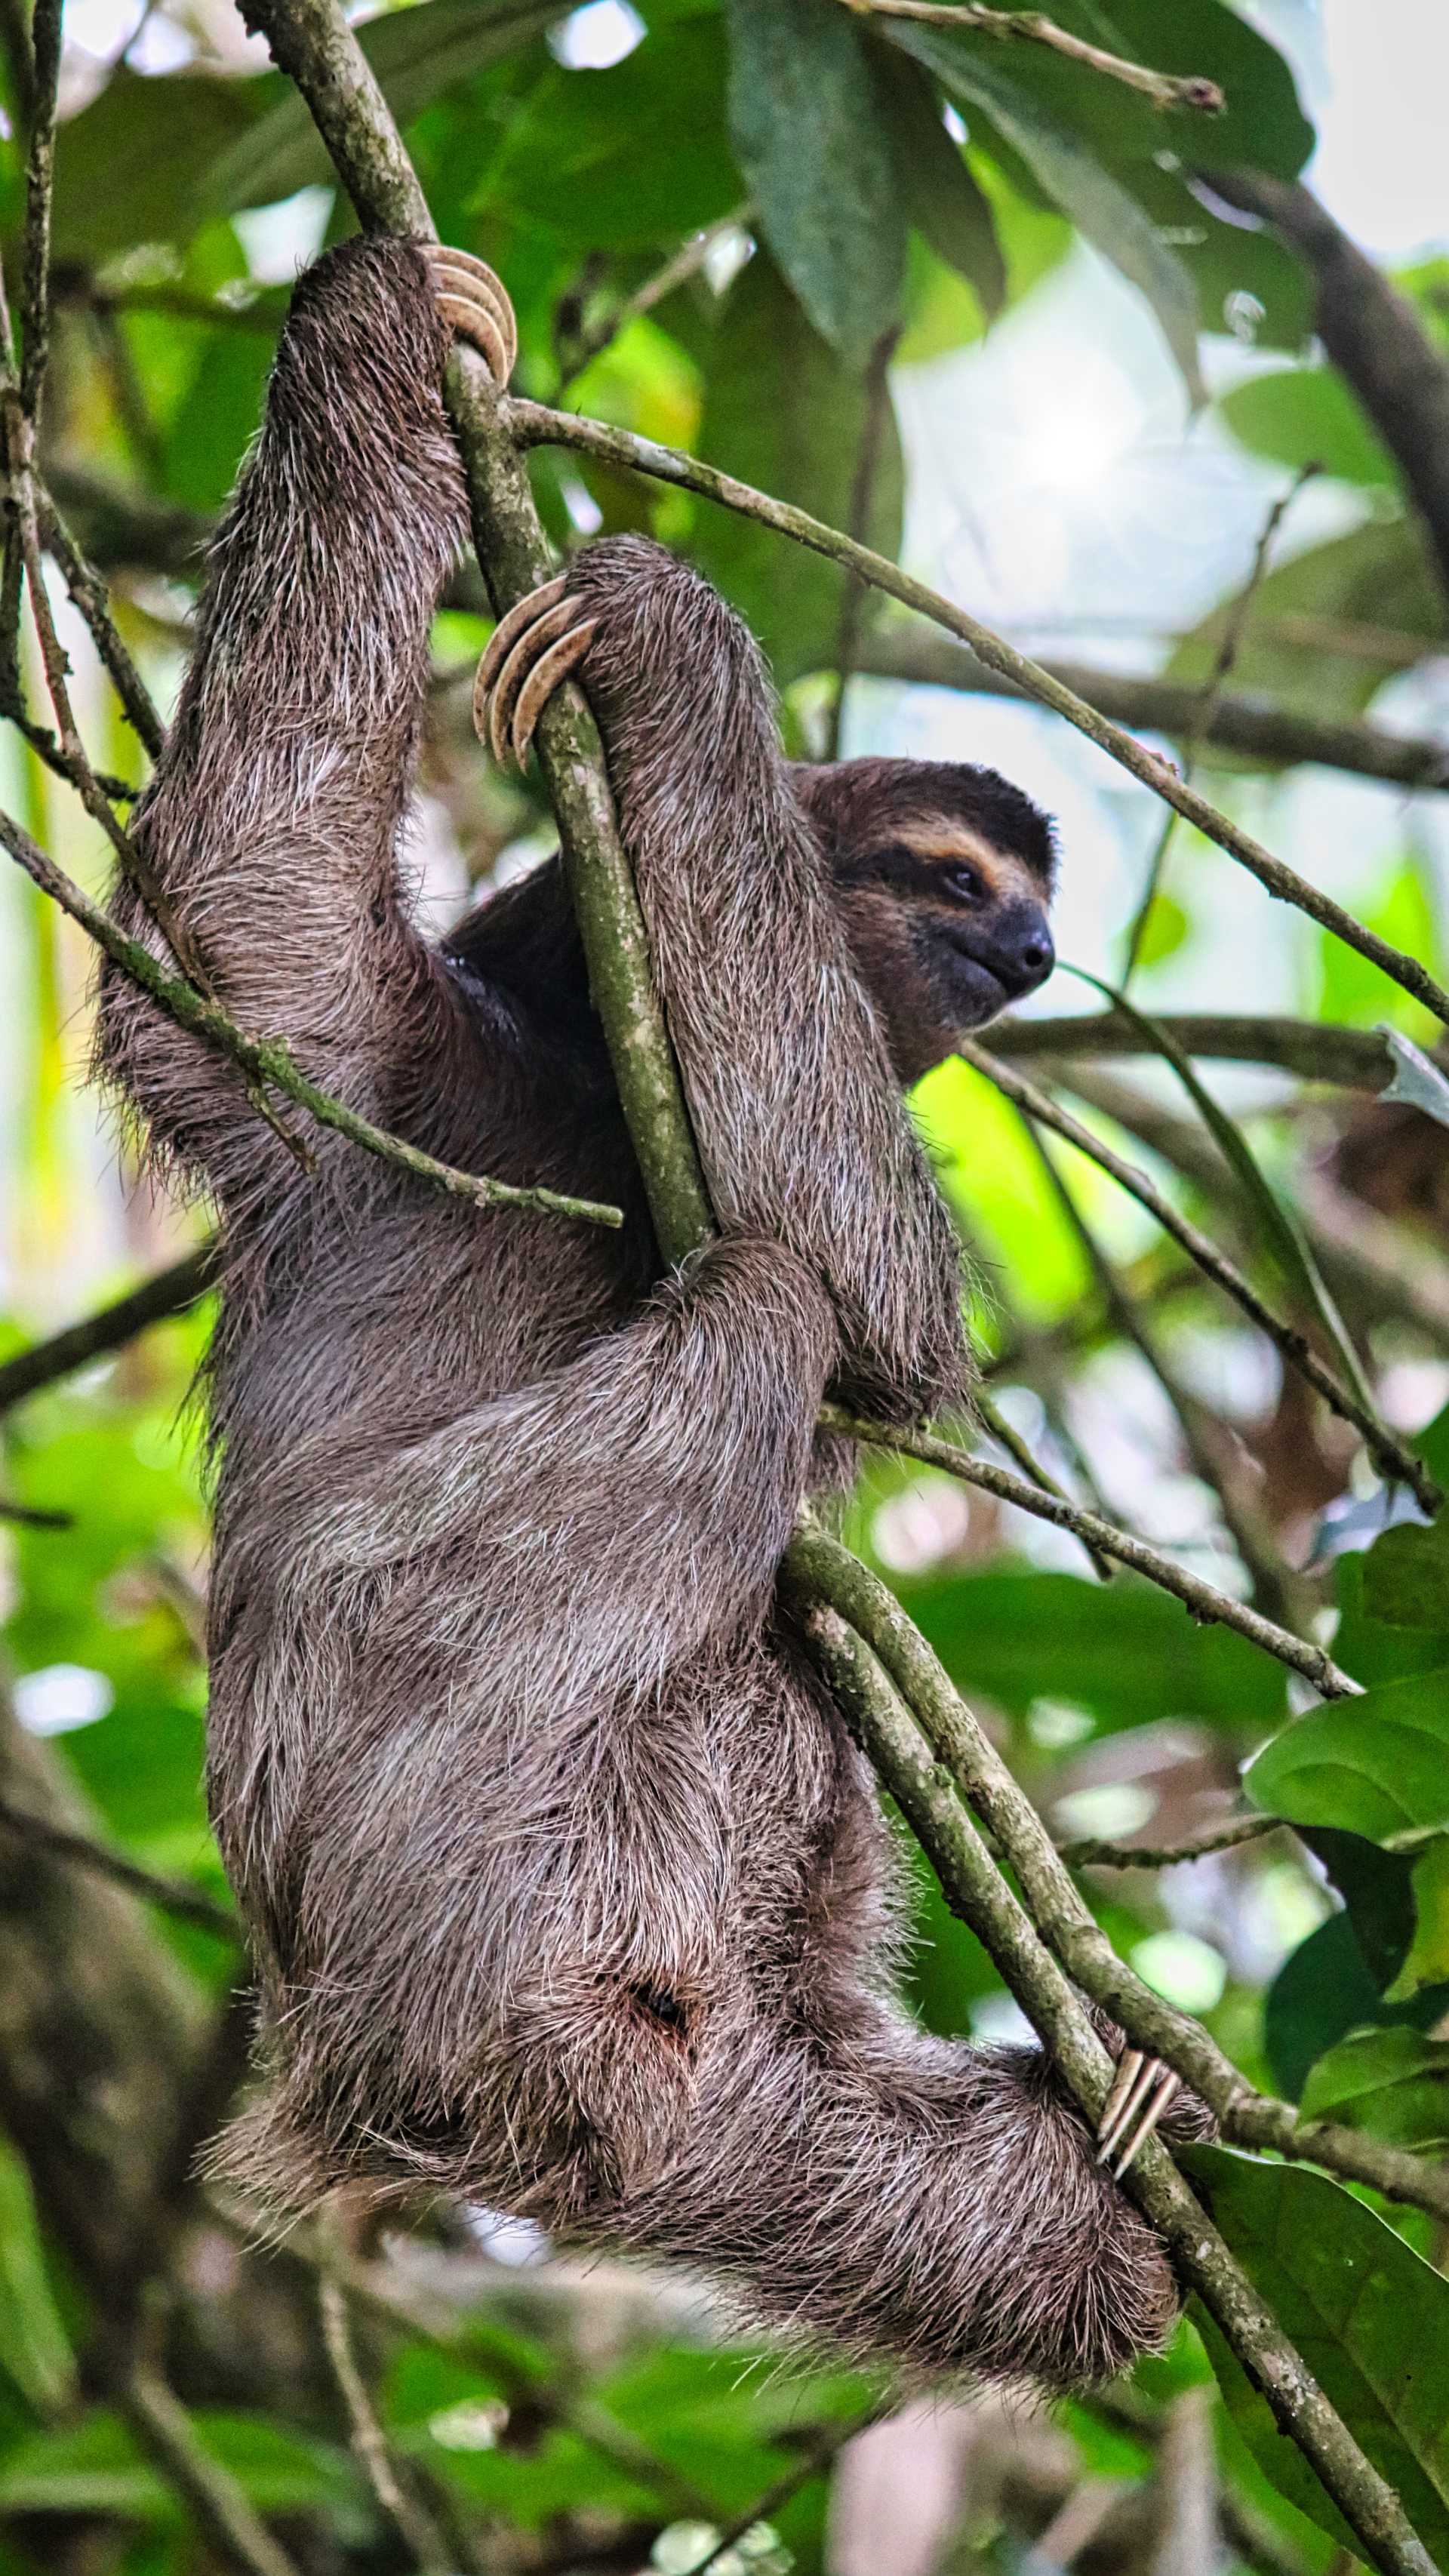 A sloth hanging from the branches of a tree